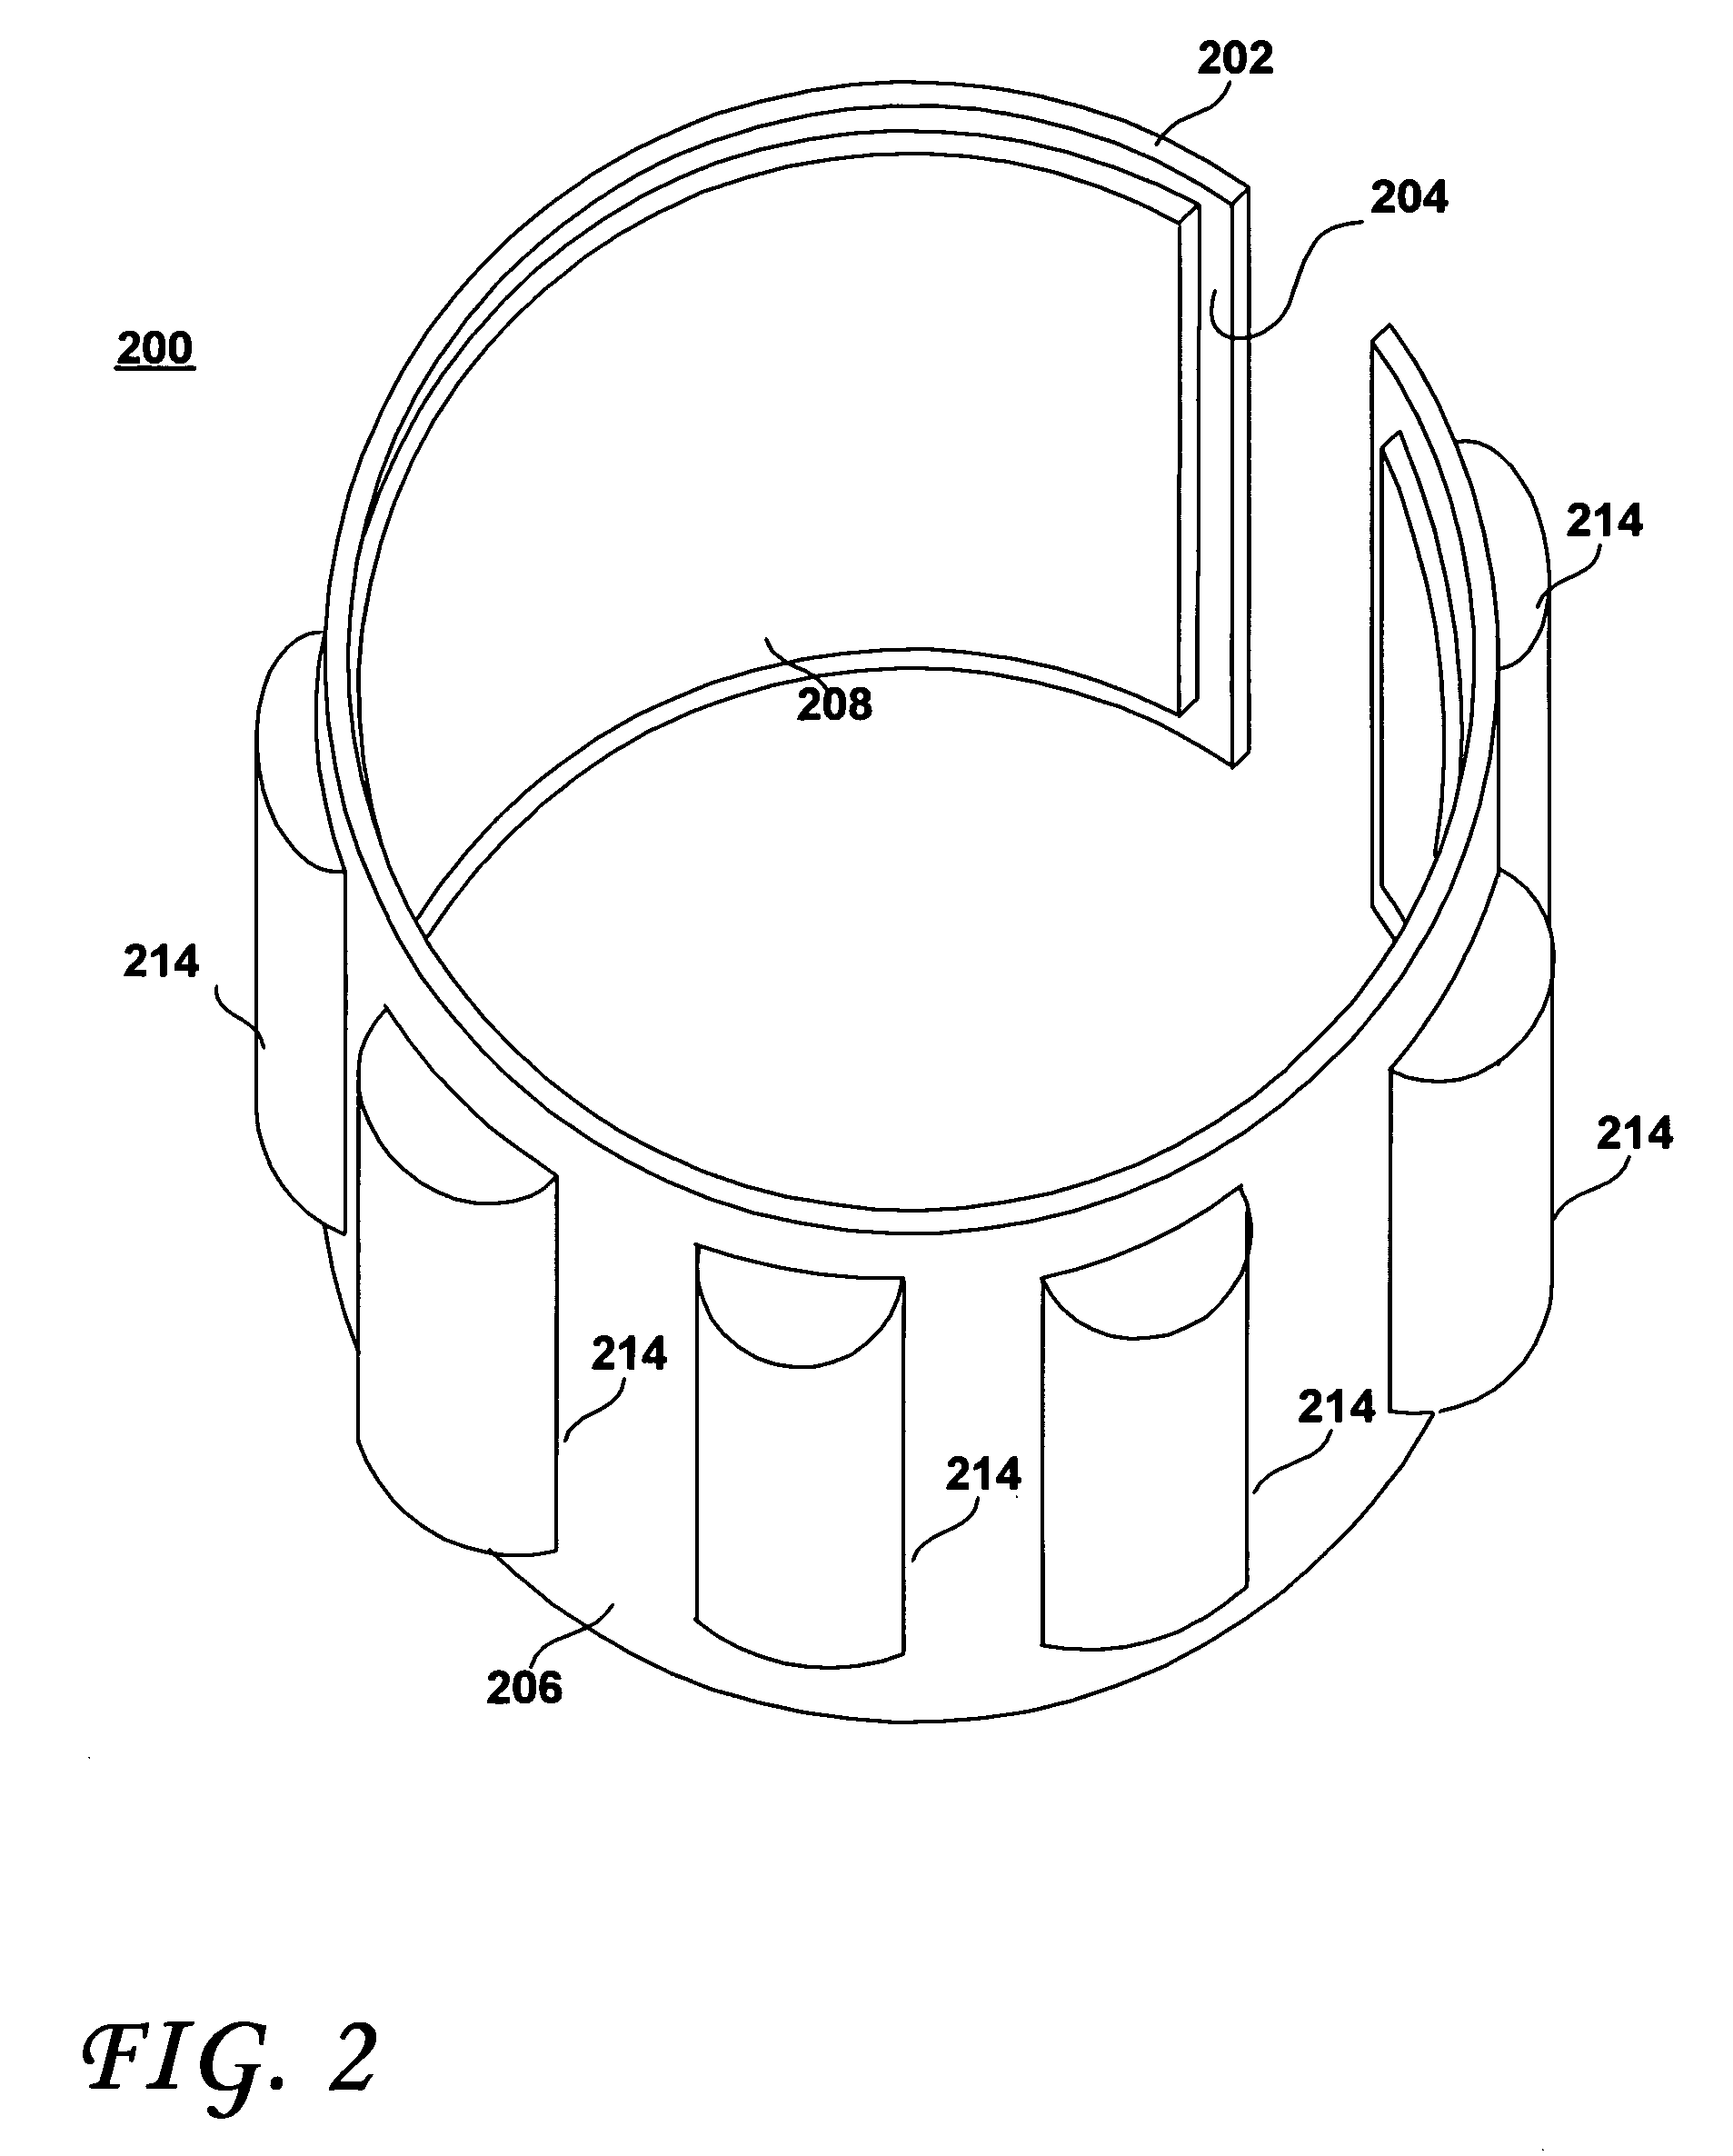 Disk drive including pivot-bearing cartridge tolerance ring having a damping layer for actuator resonance reduction